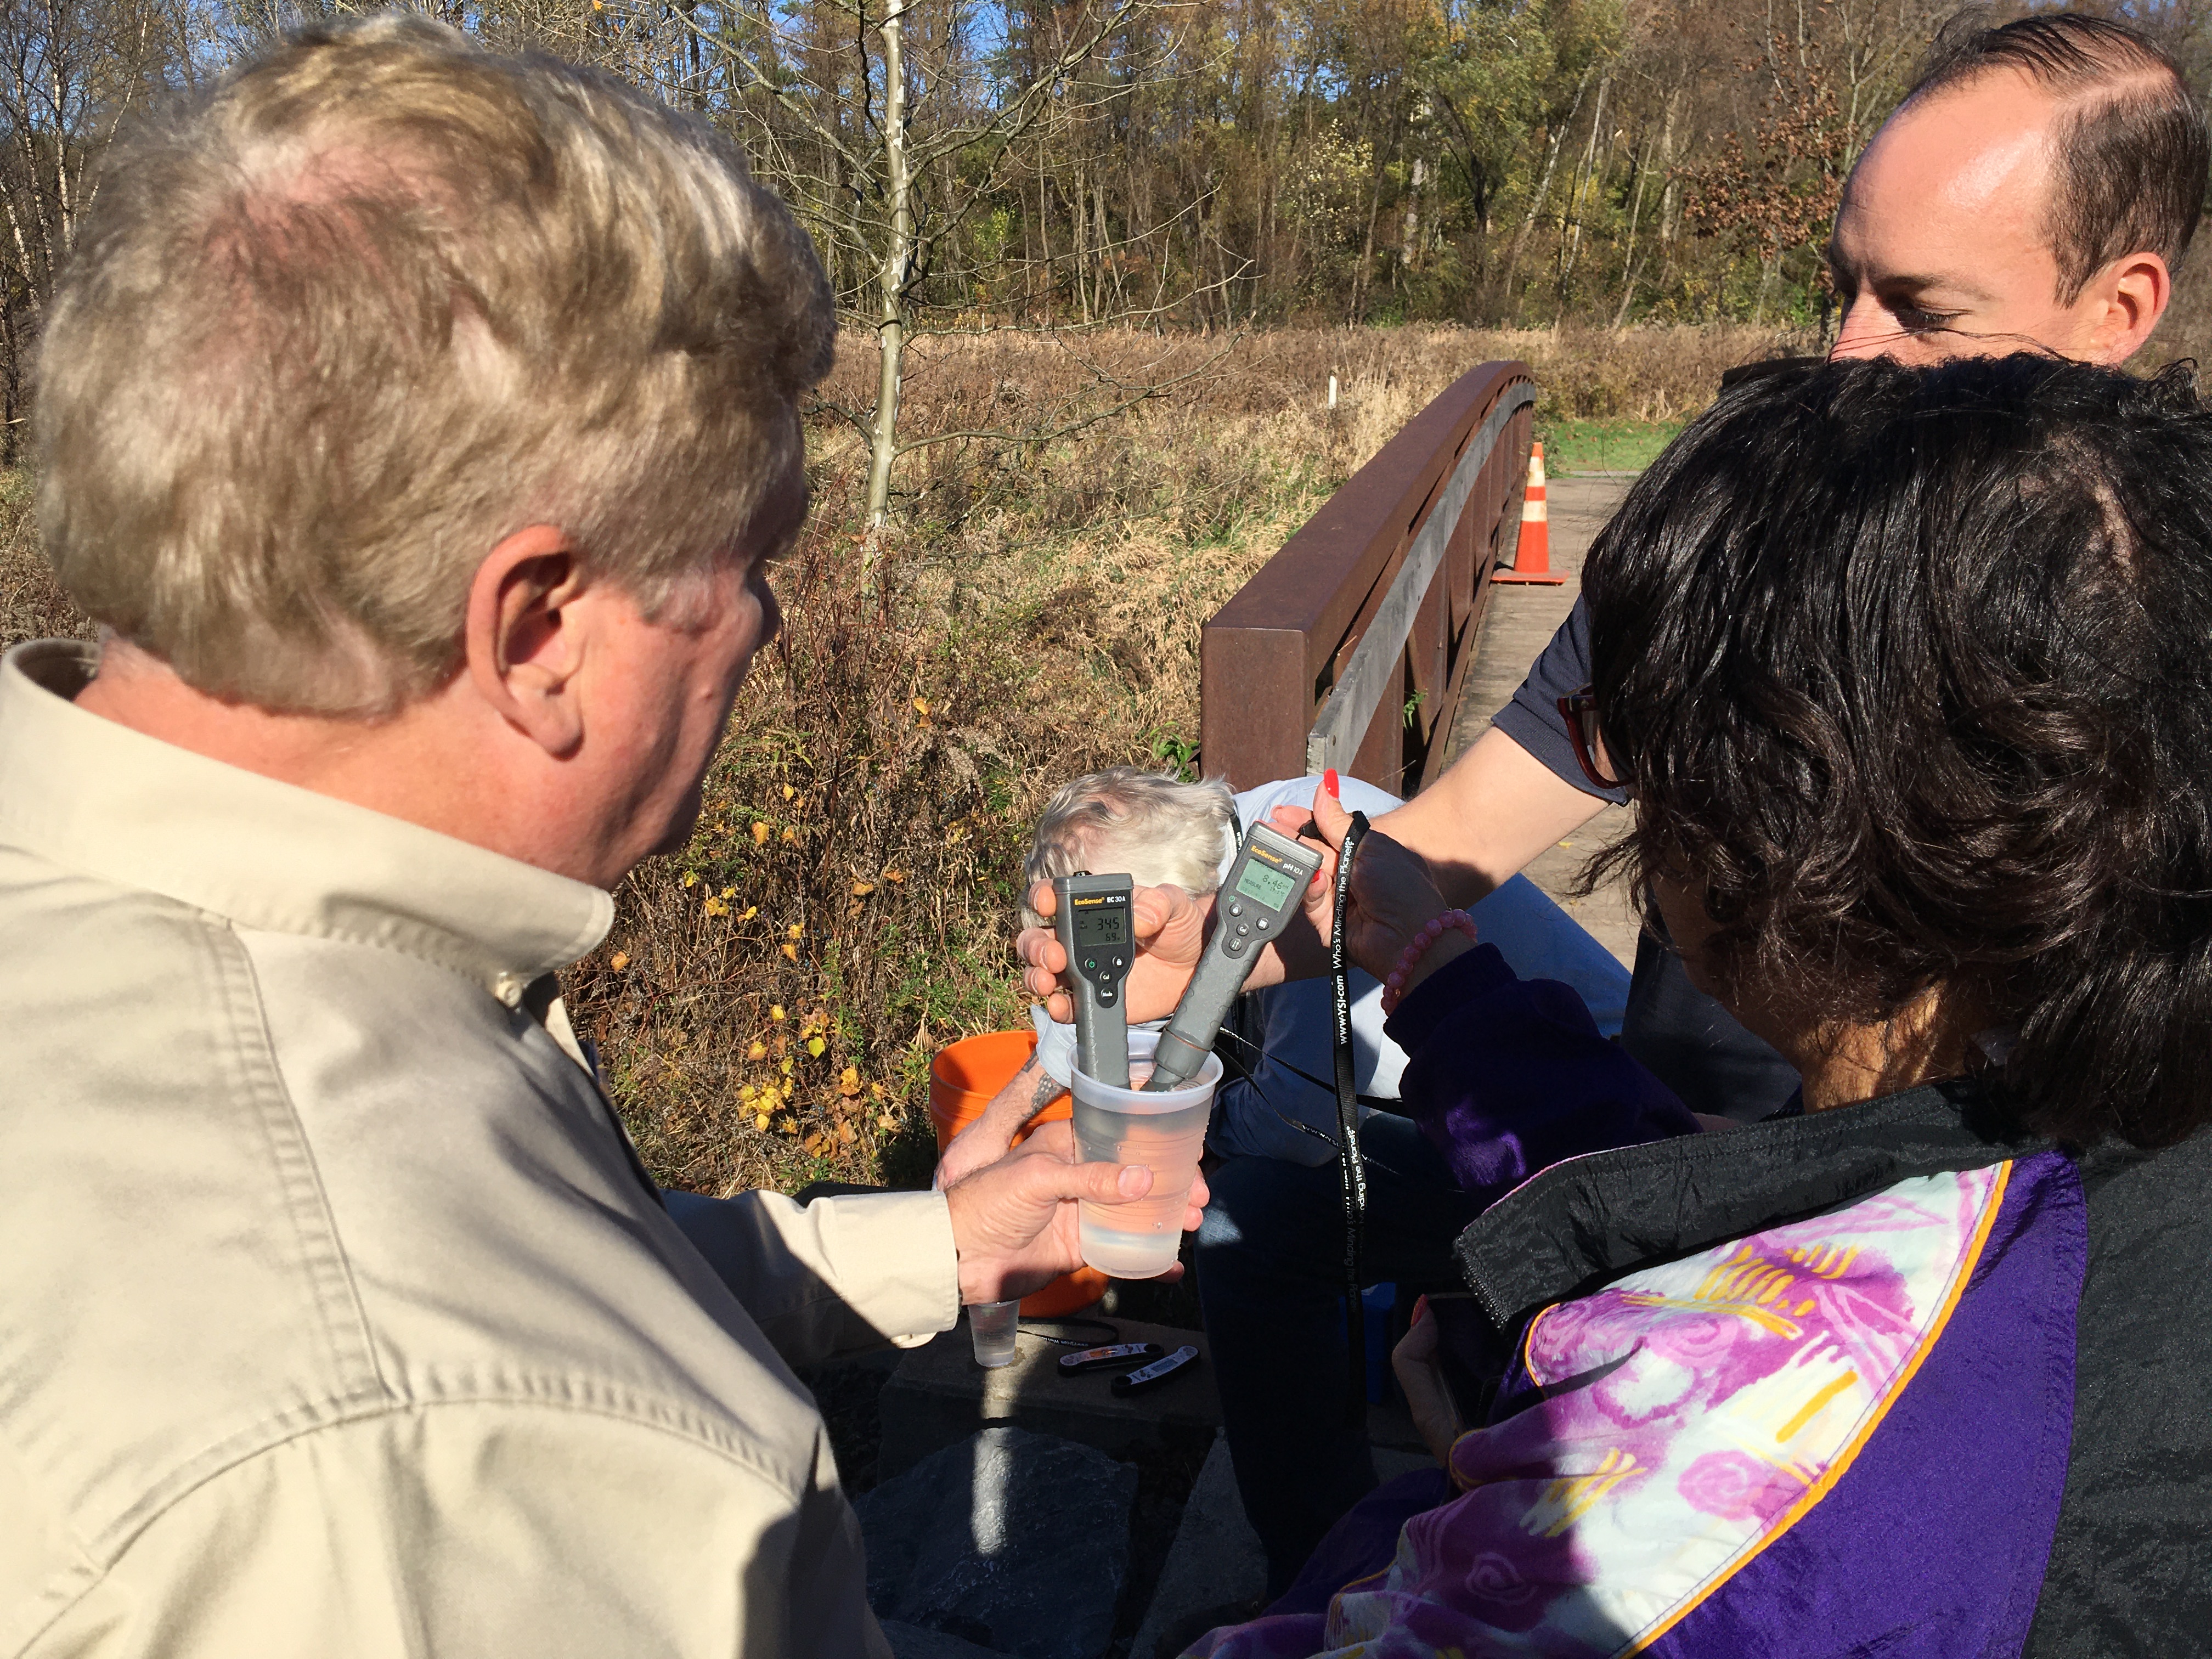 NARM participants measuring water quality at The Nature Place in Reading, PA